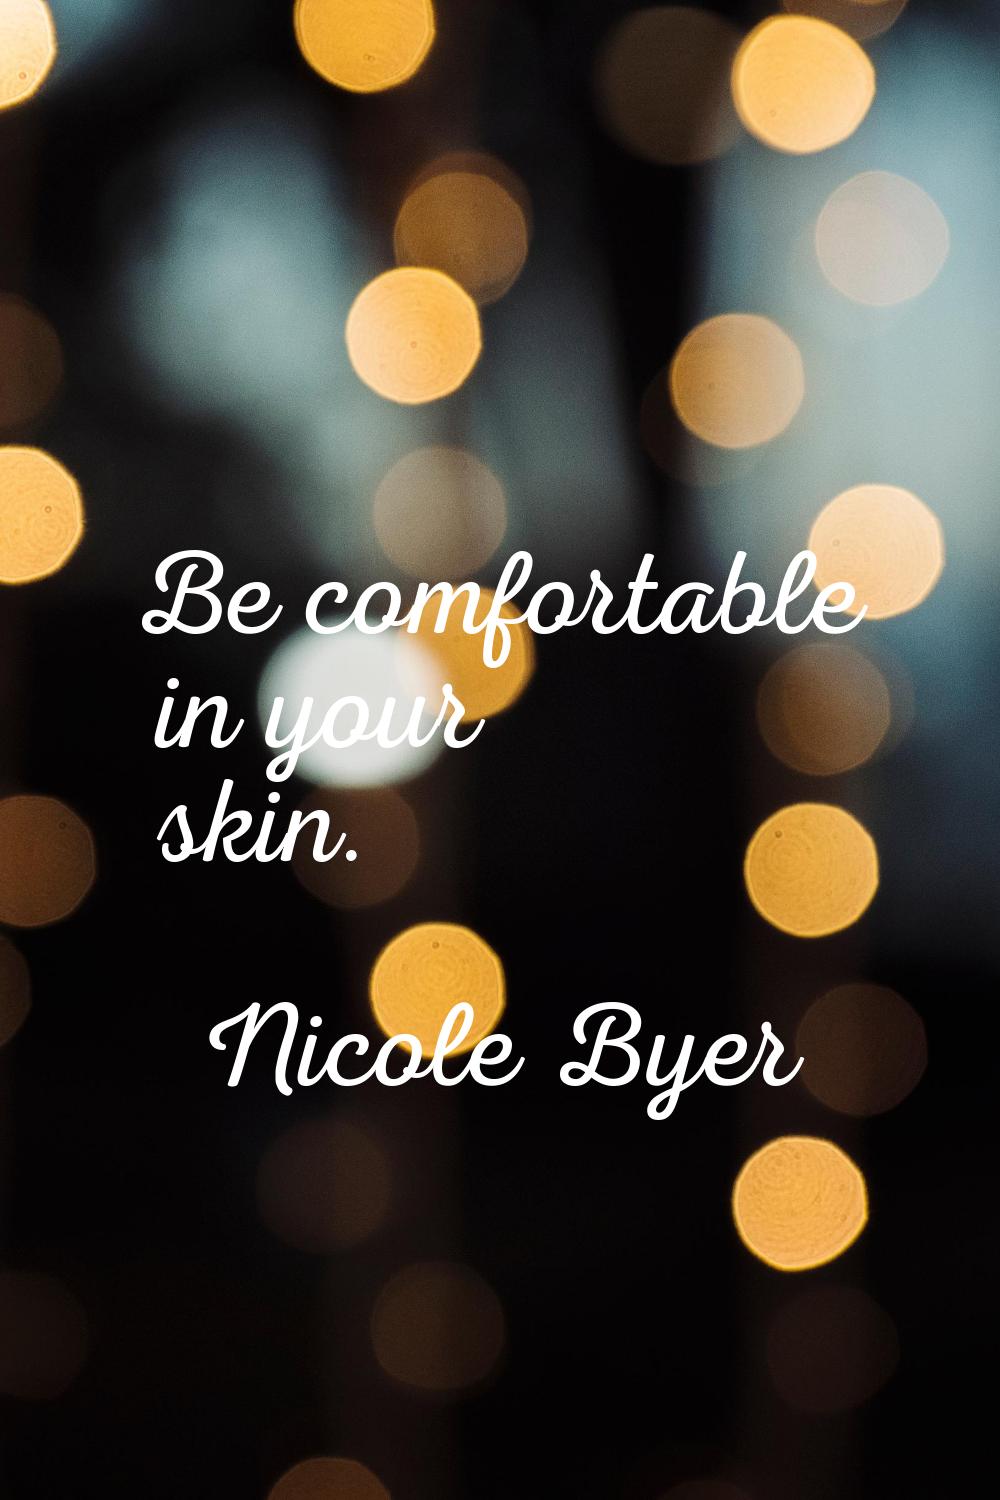 Be comfortable in your skin.